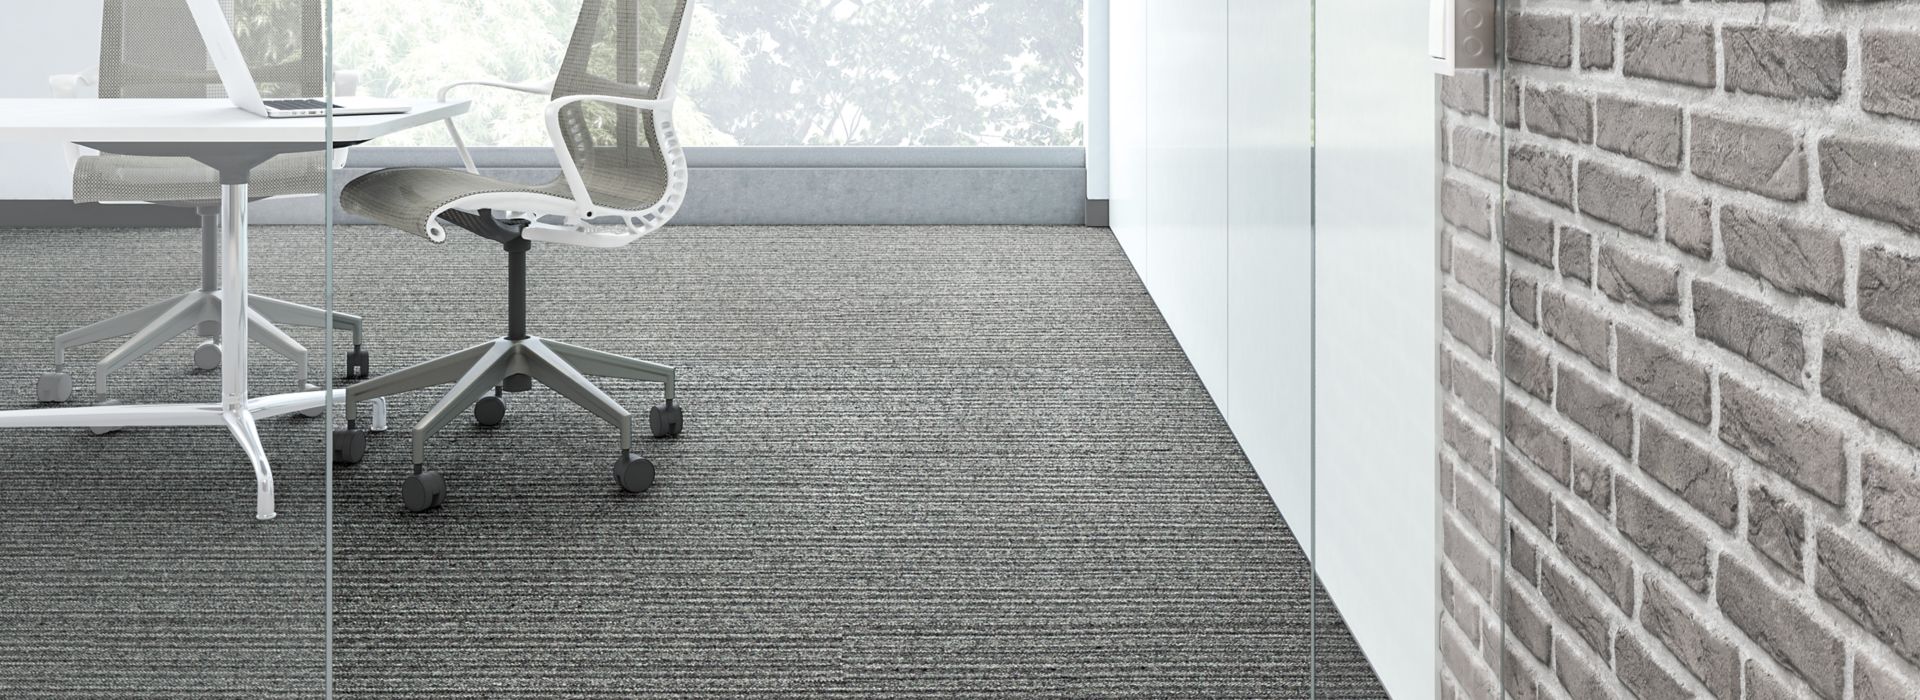 Interface WW865 plank carpet tile shown at a conference room entrance 